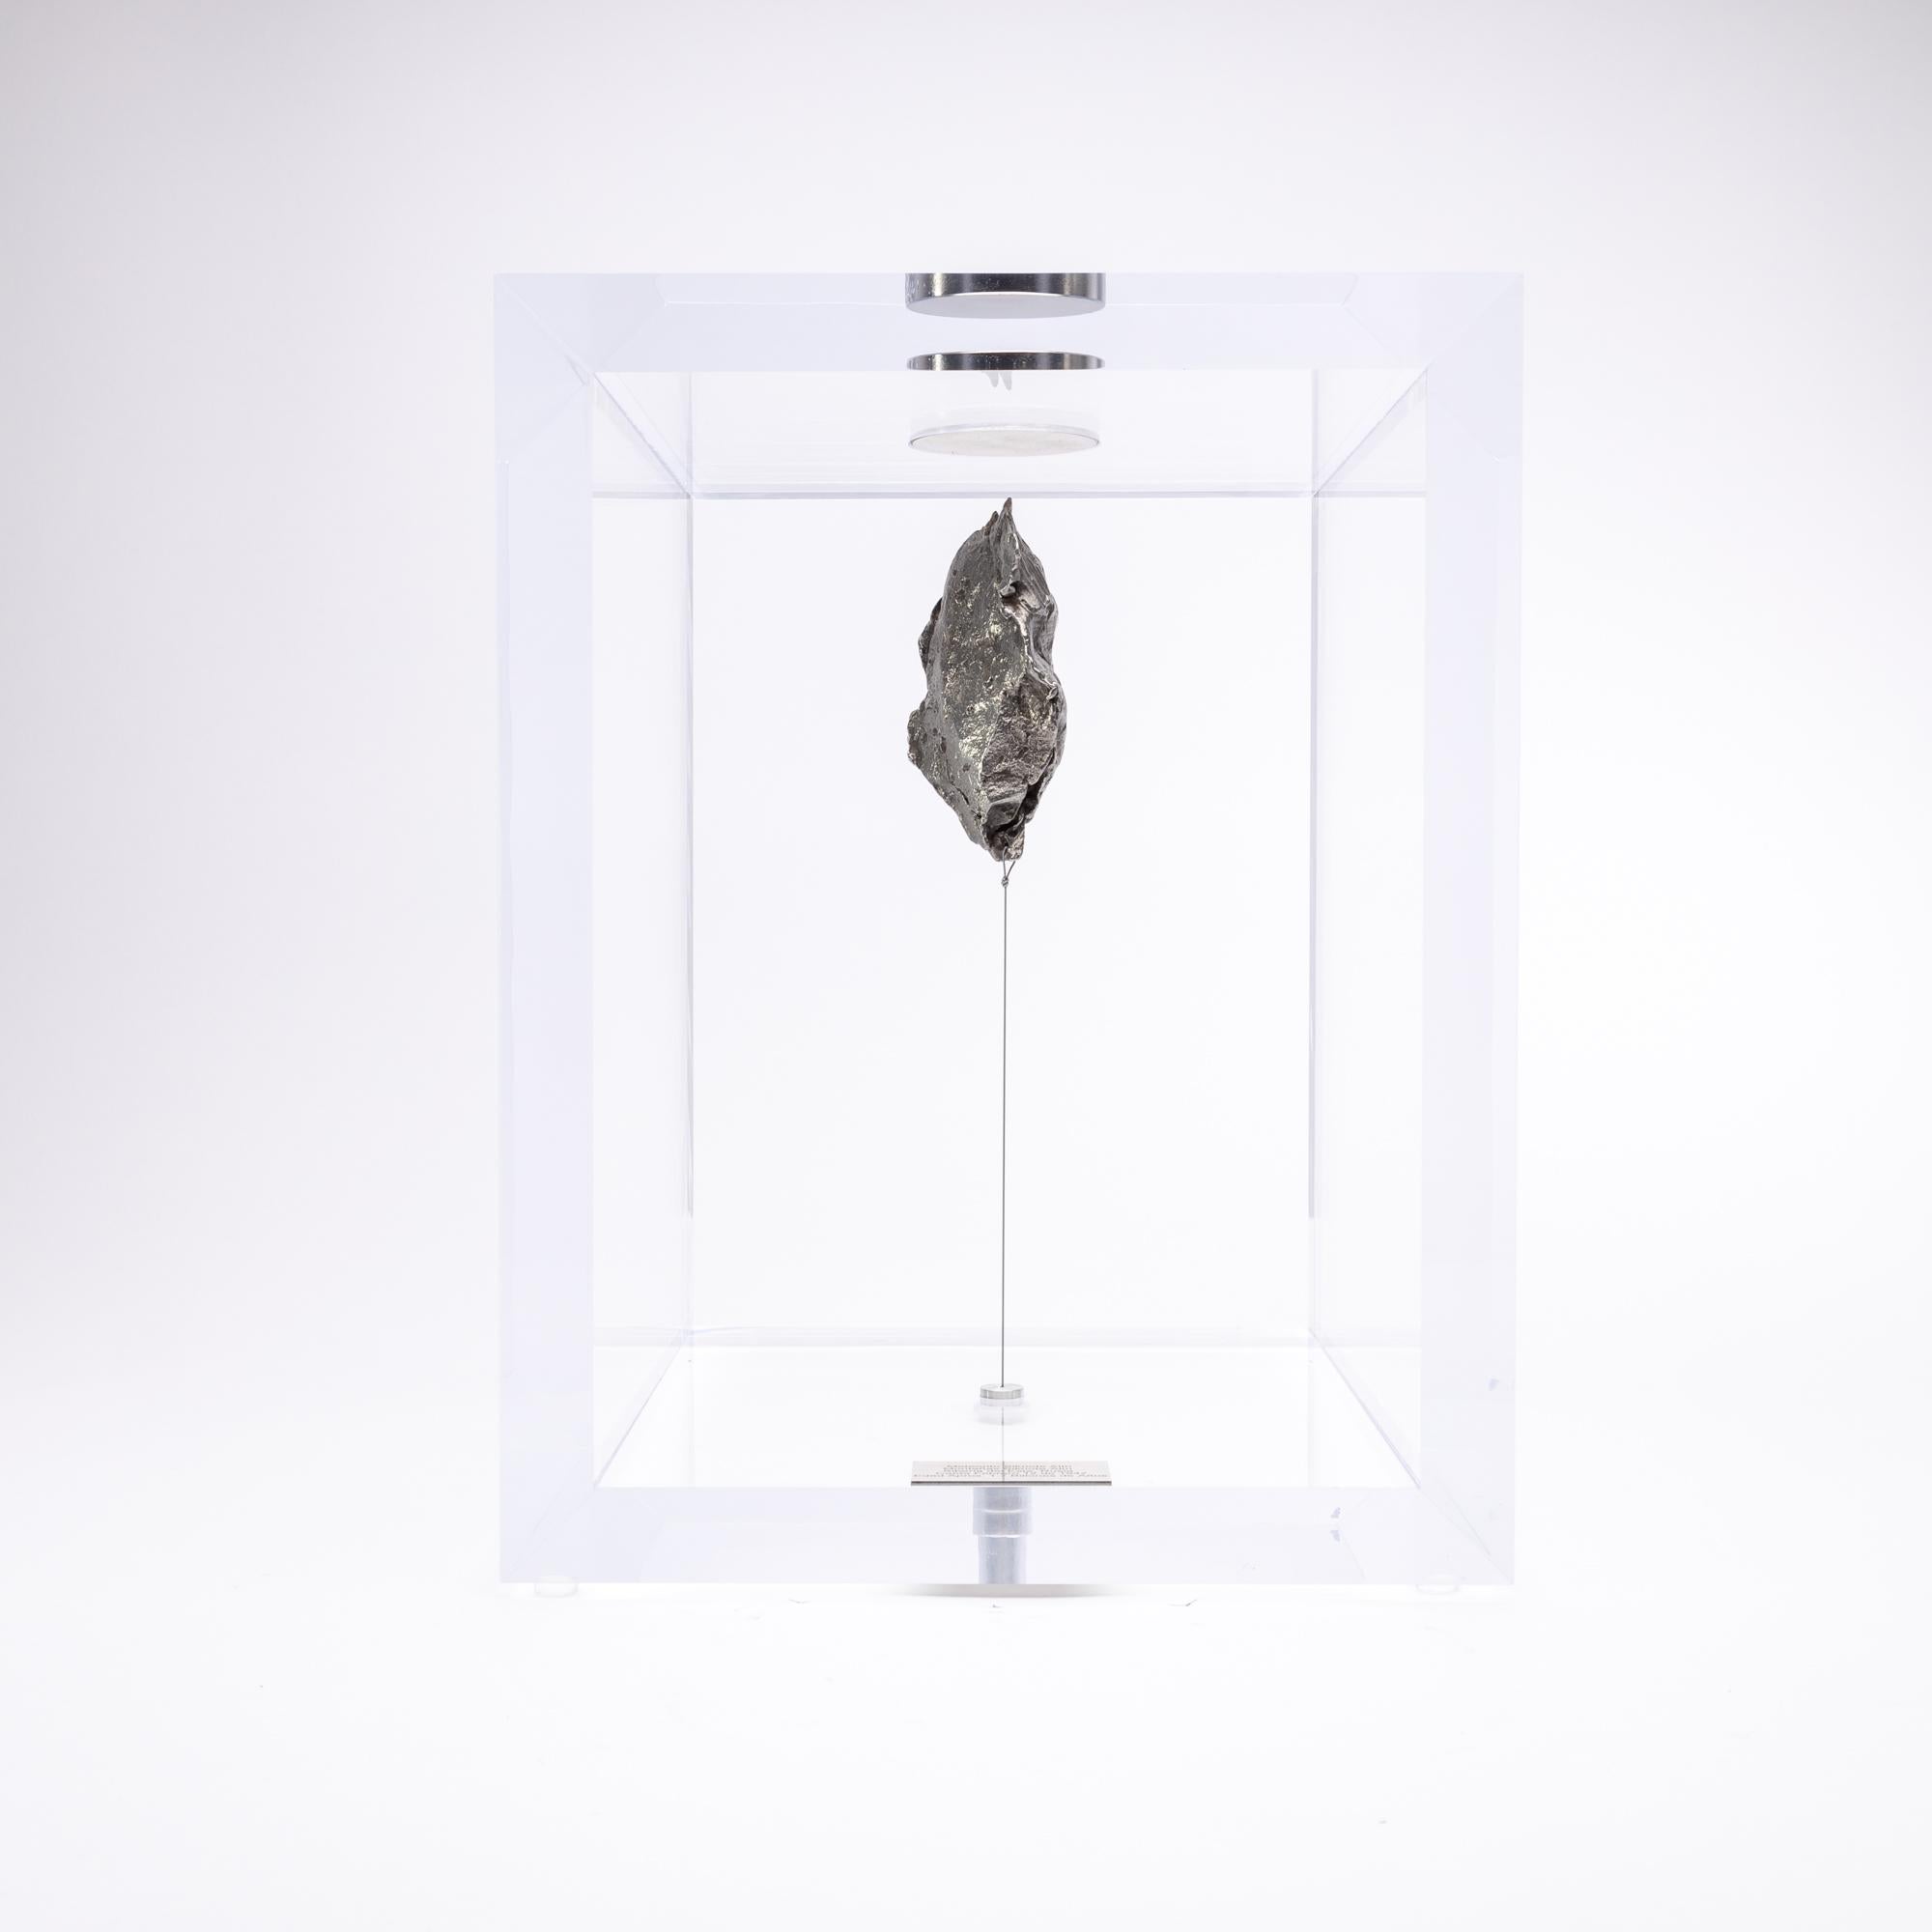 The “Space Box” was designed by Ernesto Duran, as a creative way to enhance the uniqueness of meteorites and could also be used as a decorative piece. It’s an acrylic box with a magnet on top and a steel string pulling the meteorite straight